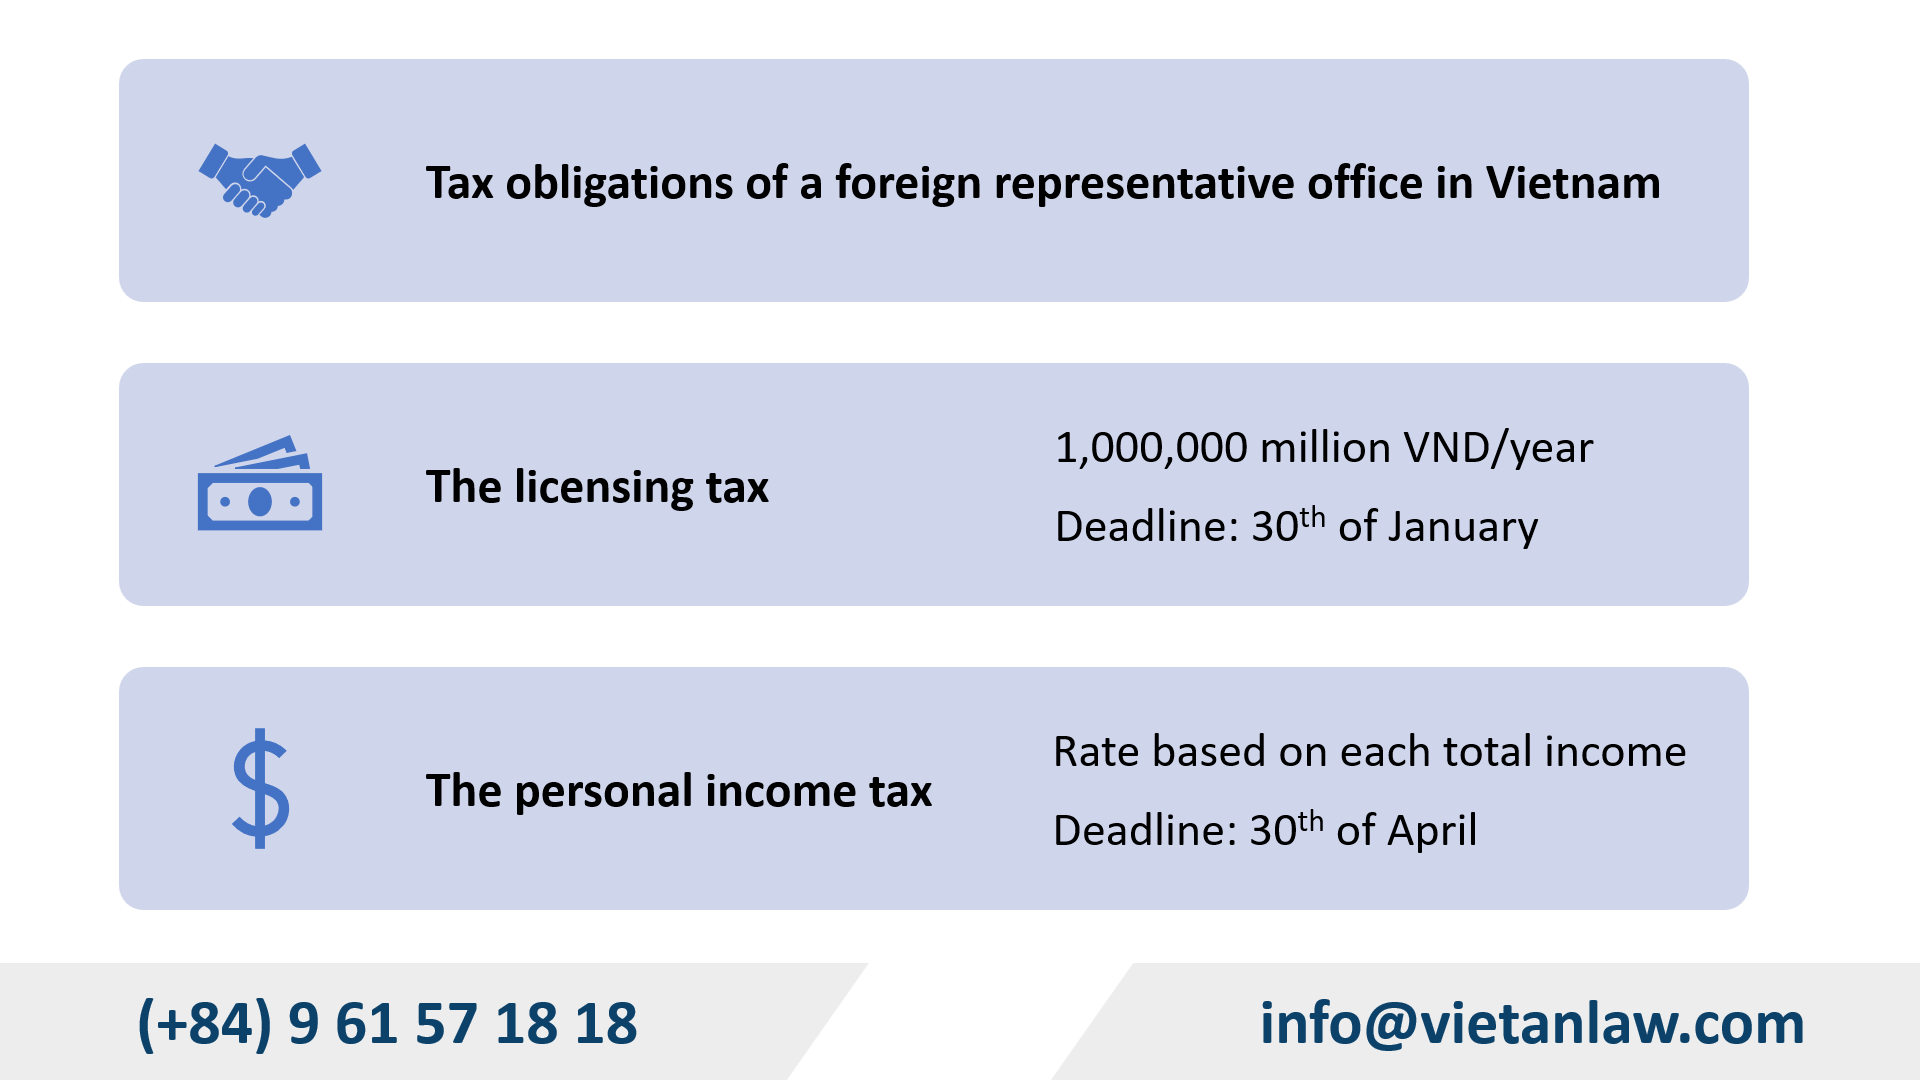 Tax obligations of a foreign representative office in Vietnam